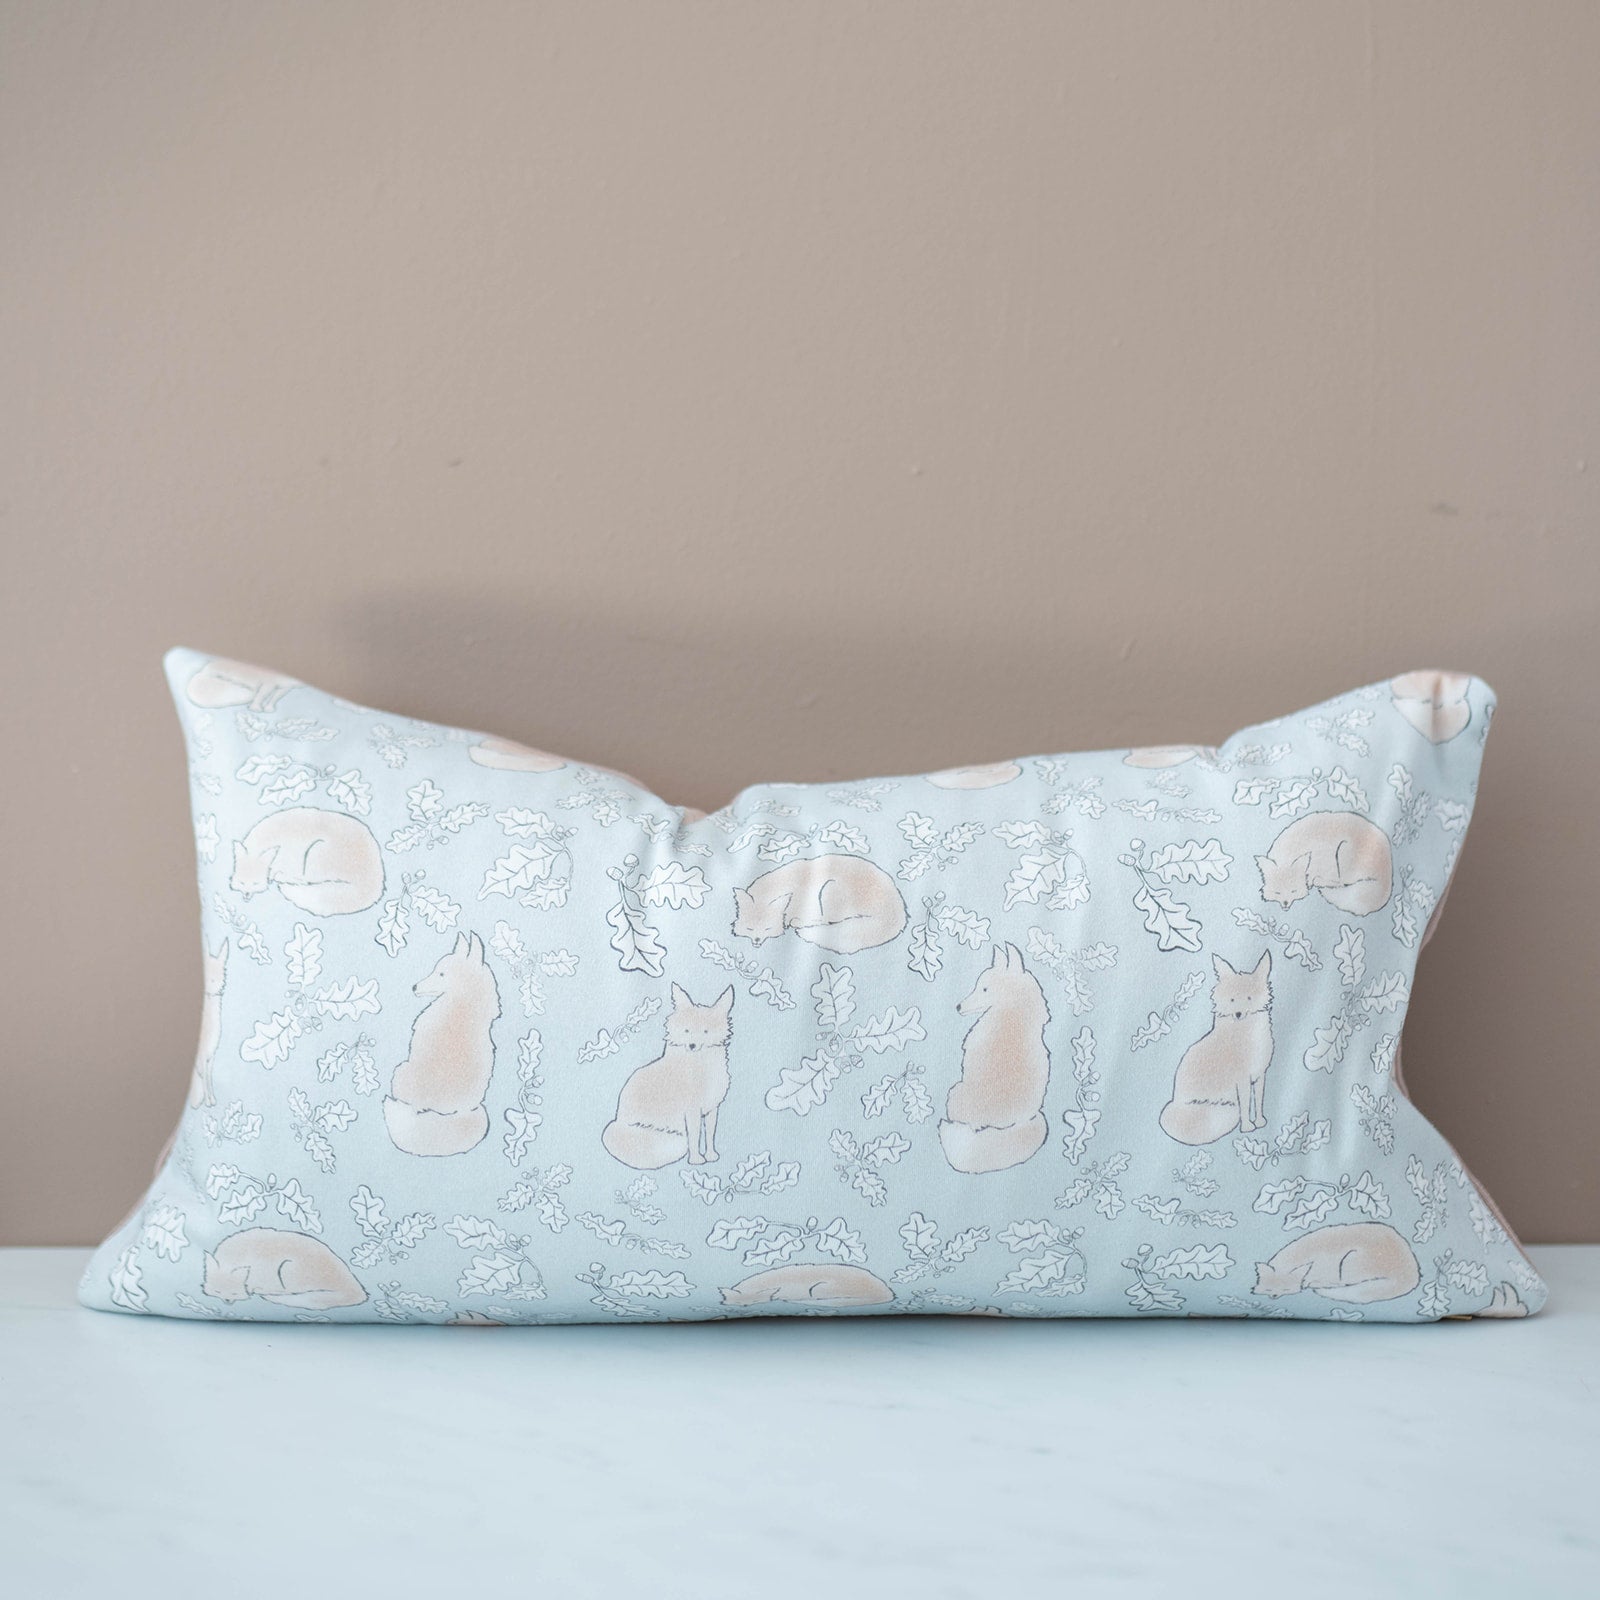 Foxes Pillow Cover by Fox & Flax - Rug & Weave